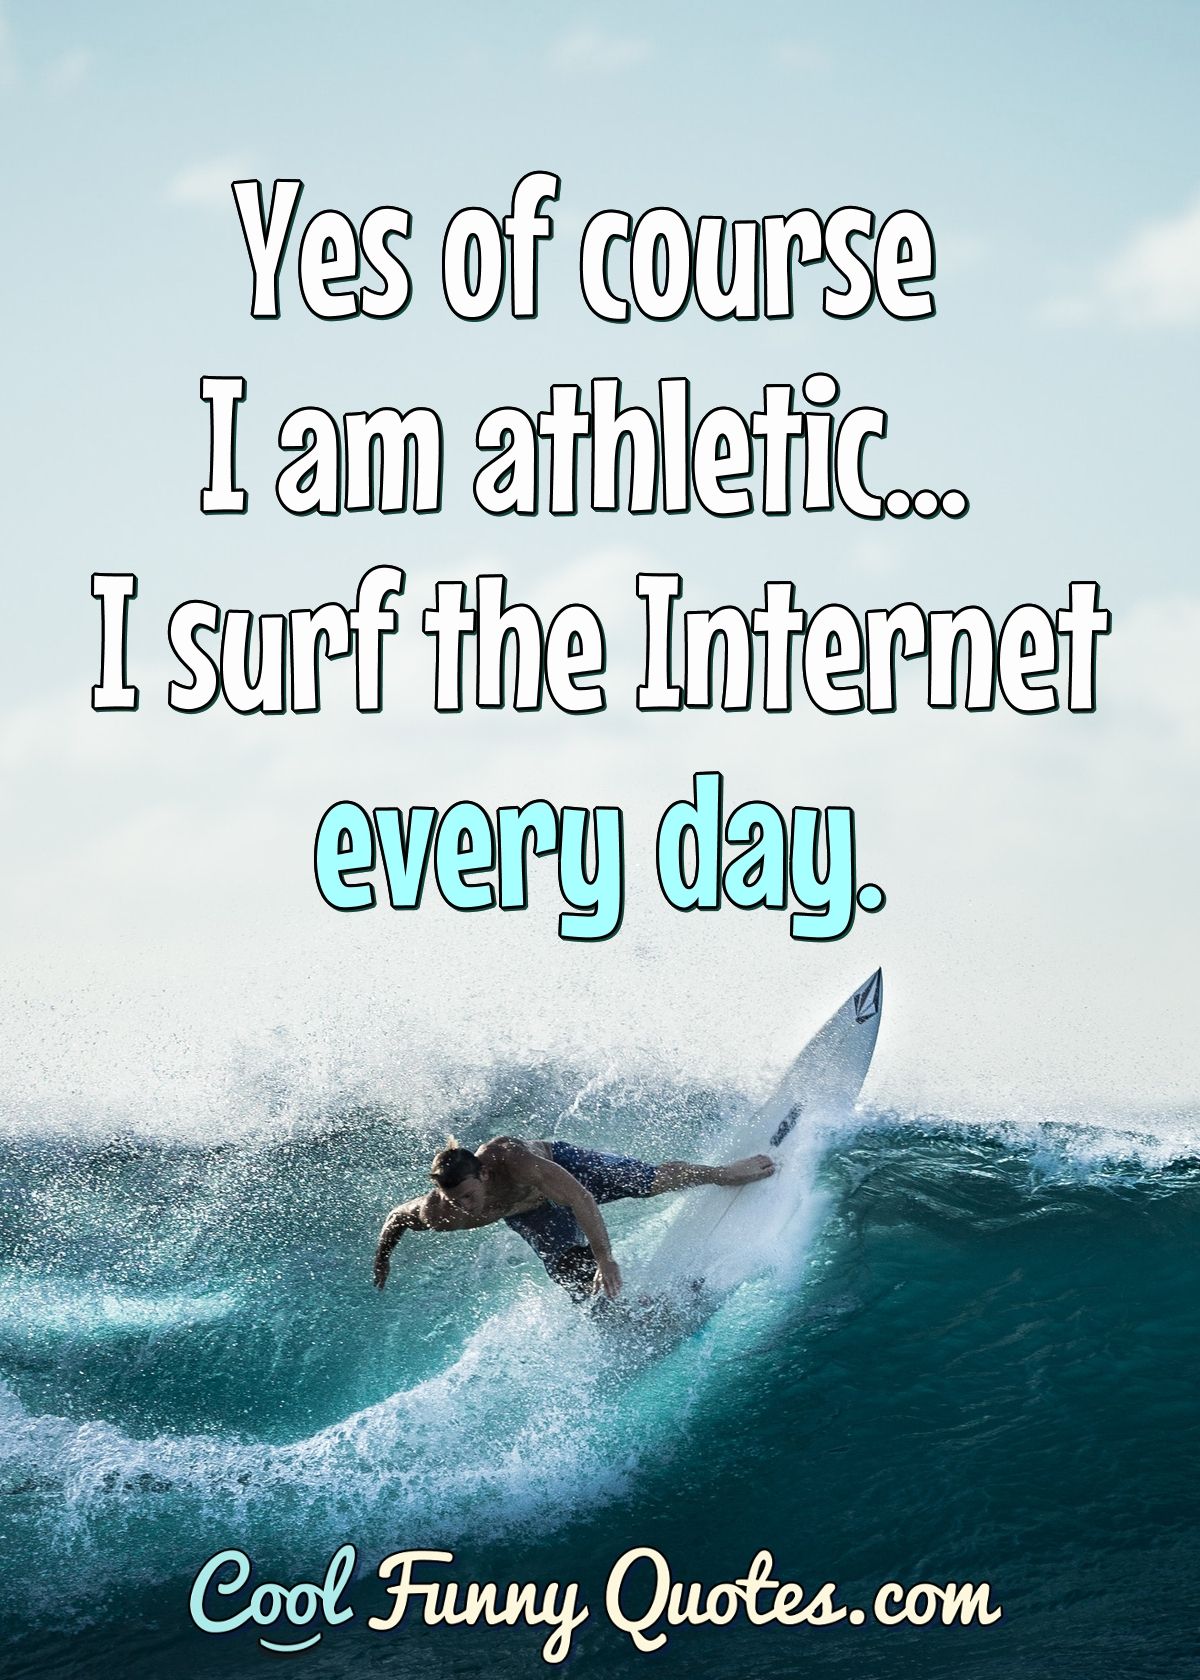 Yes of course I am athletic... I surf the Internet every day. - Anonymous